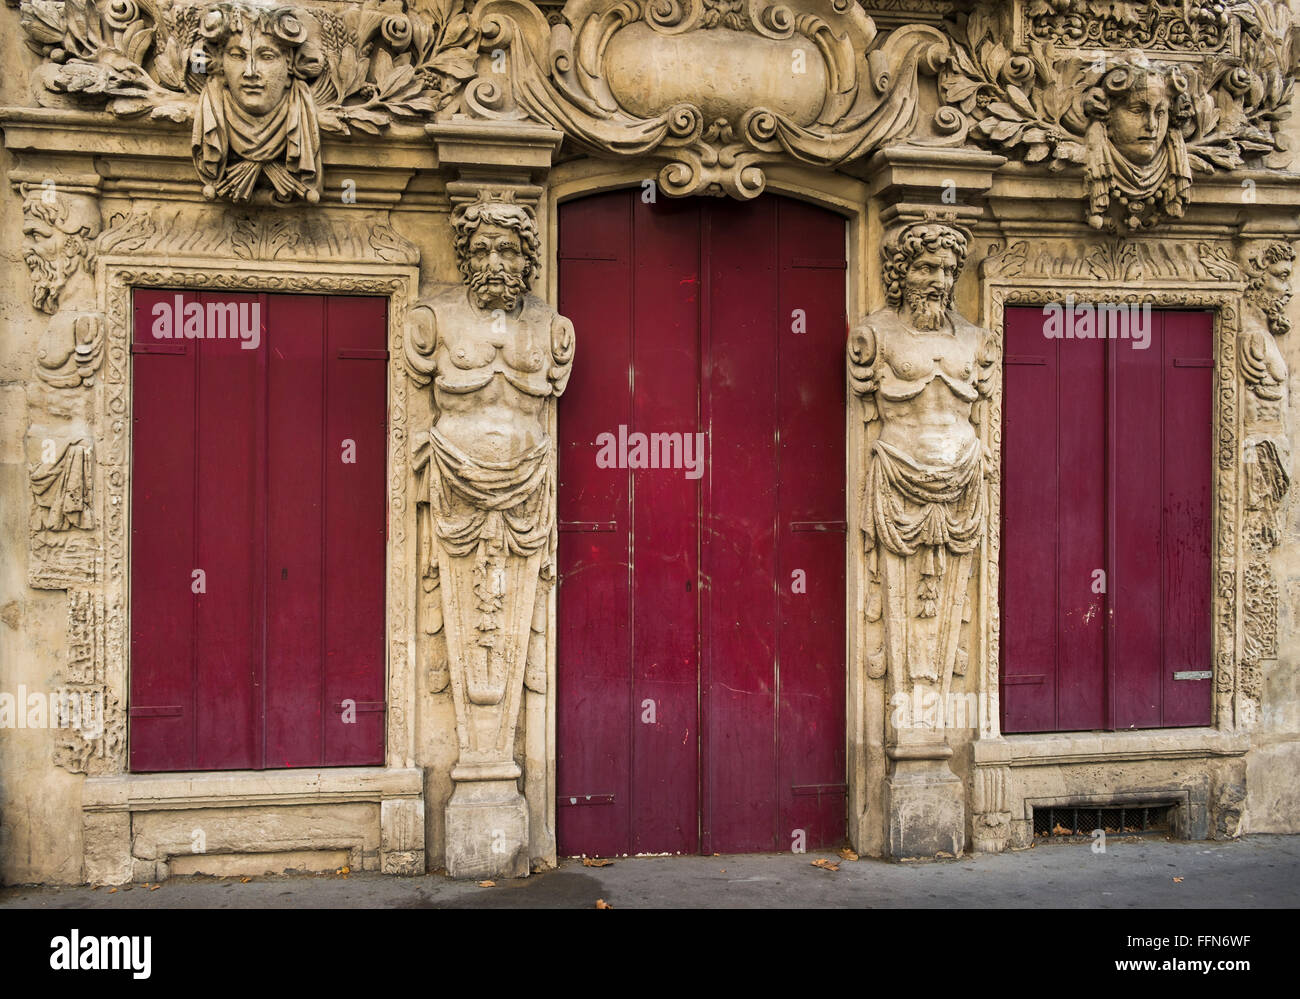 opulently decorated facade, red wooden doors and shutters Stock Photo